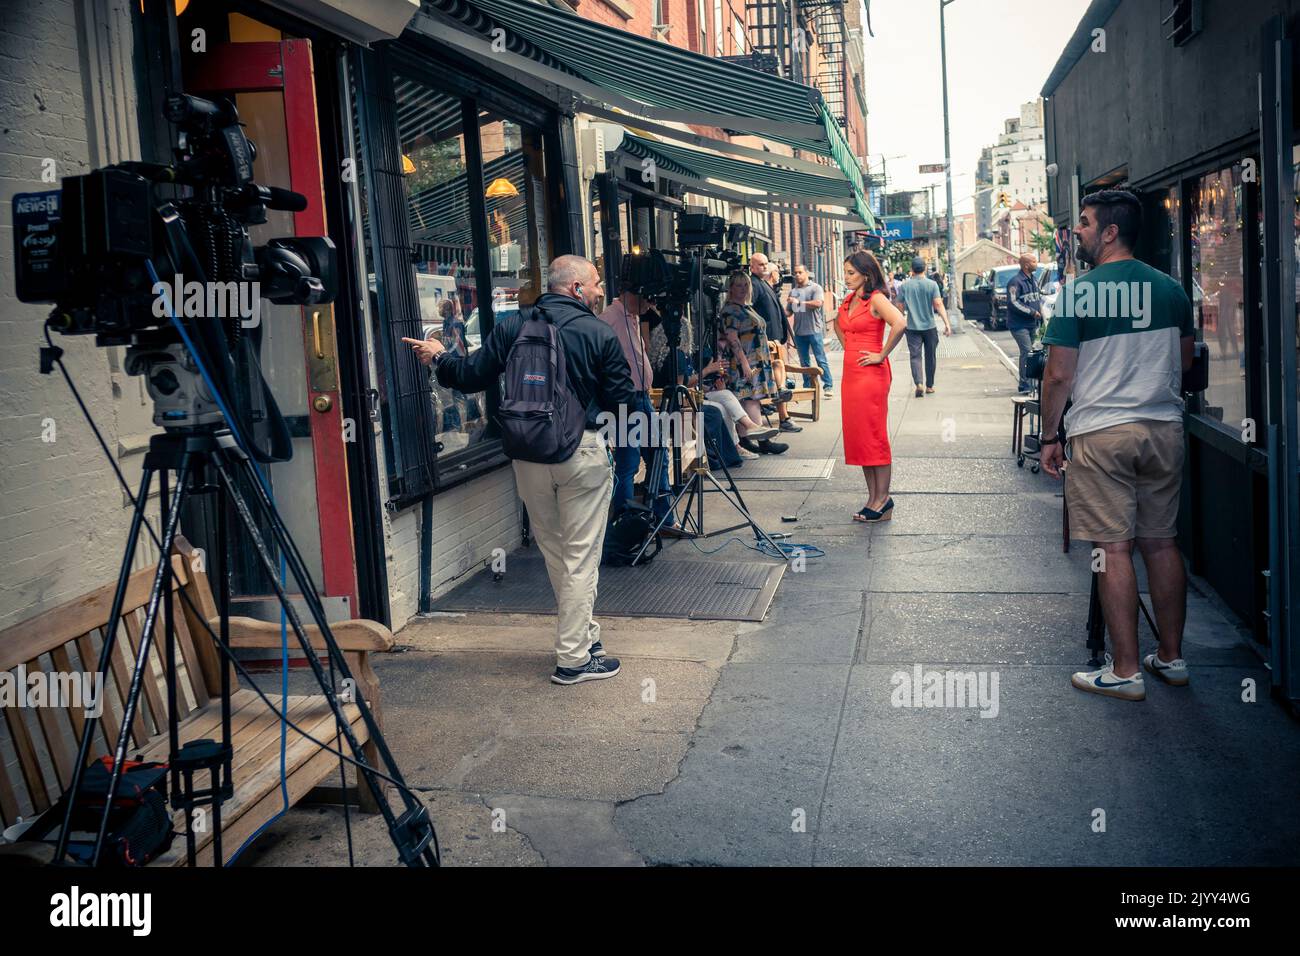 Media outside the Anglophile restaurant Tea and Sympathy in Greenwich Village in New York on Thursday, September 8, 2022. The long-reigning monarch of the United Kingdom Queen Elizabeth II died at the age of 96 at Balmoral Castle in Scotland. (© Richard B. Levine) Stock Photo